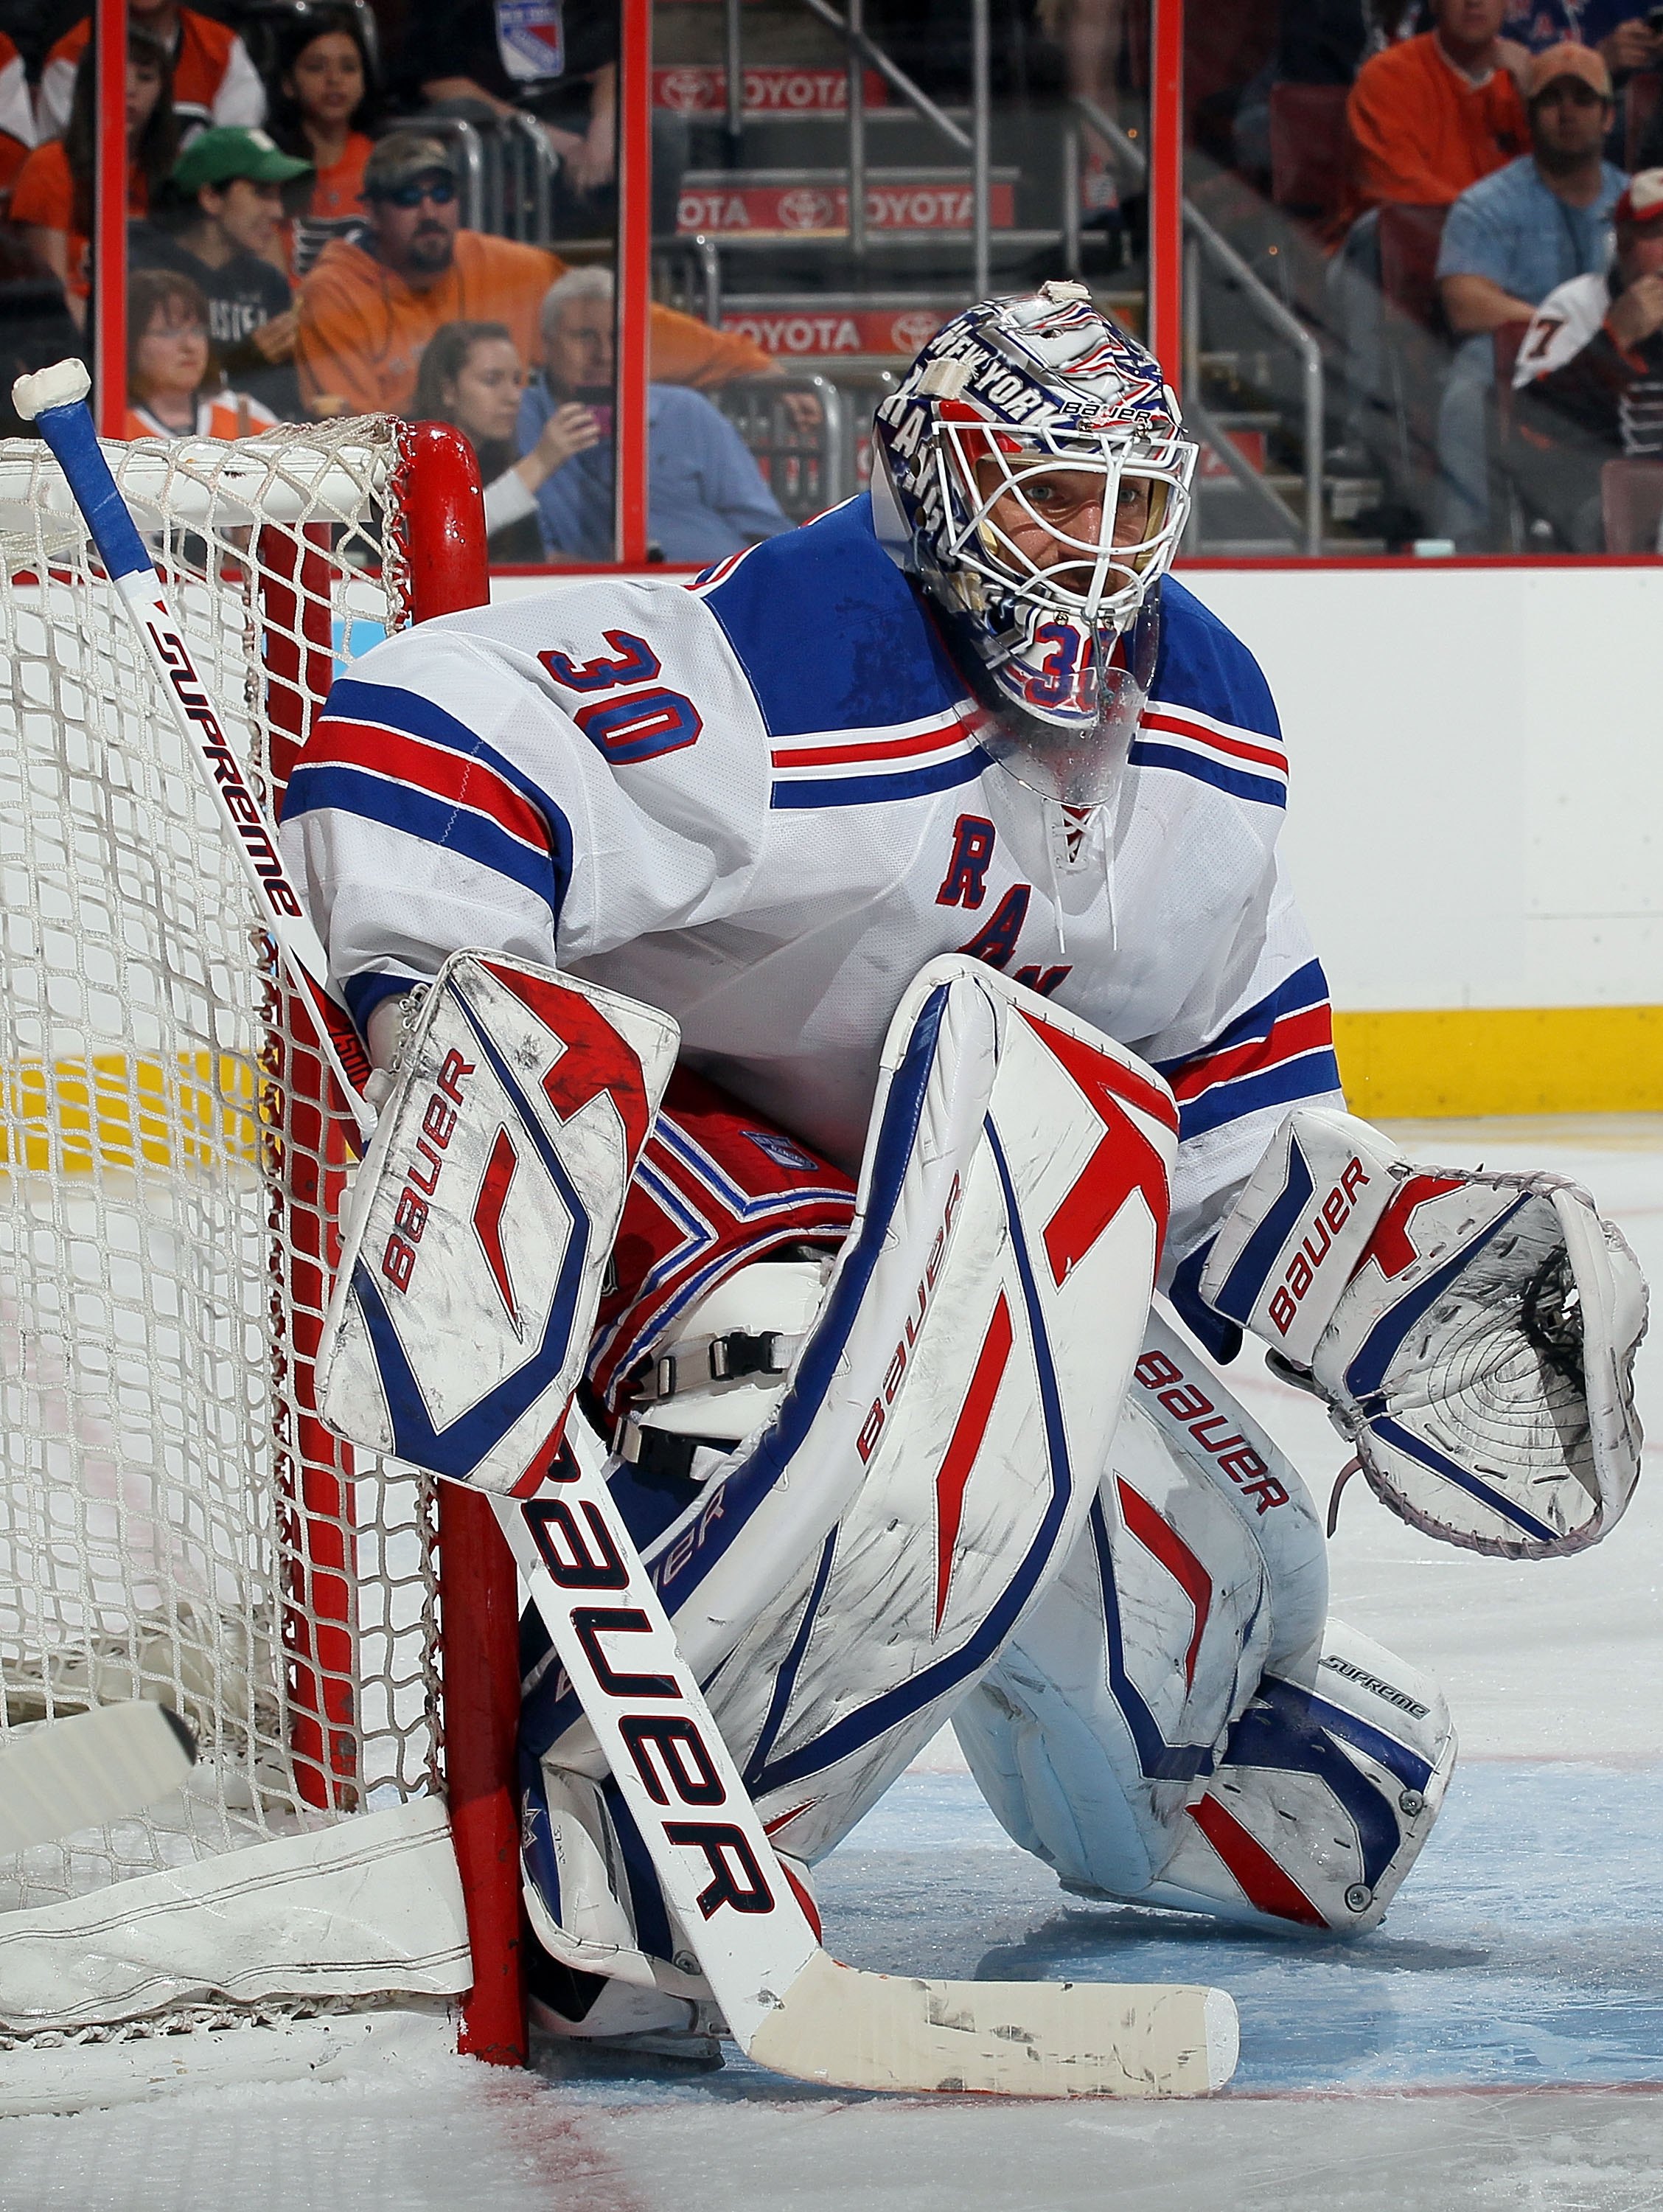 NHL - Oddities and absurdities in outfitting a goalie - 10,000